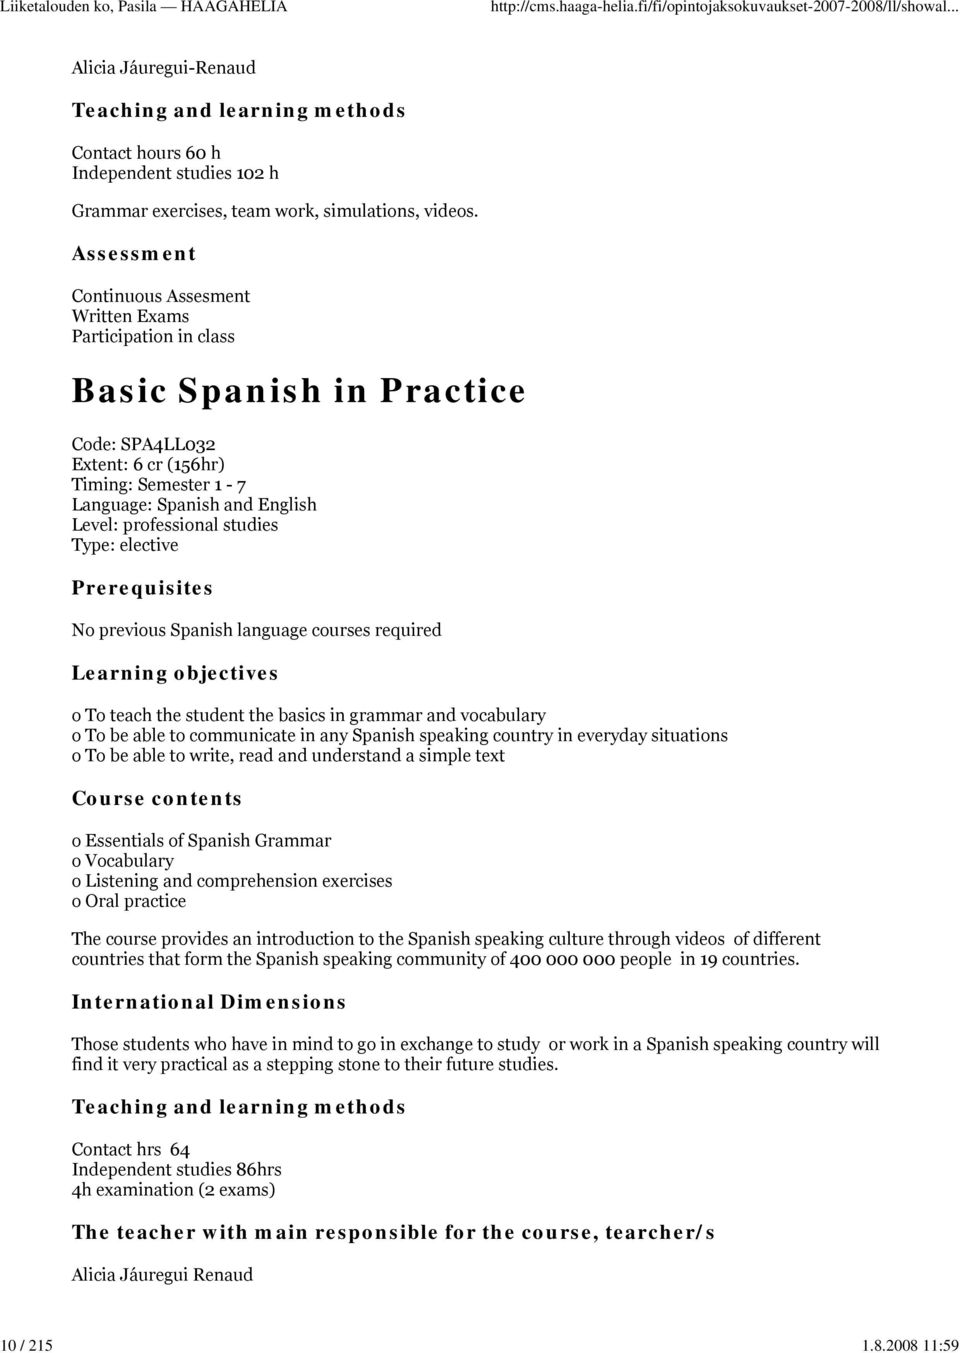 professional studies Type: elective Prerequisites No previous Spanish language courses required Learning objectives o To teach the student the basics in grammar and vocabulary o To be able to